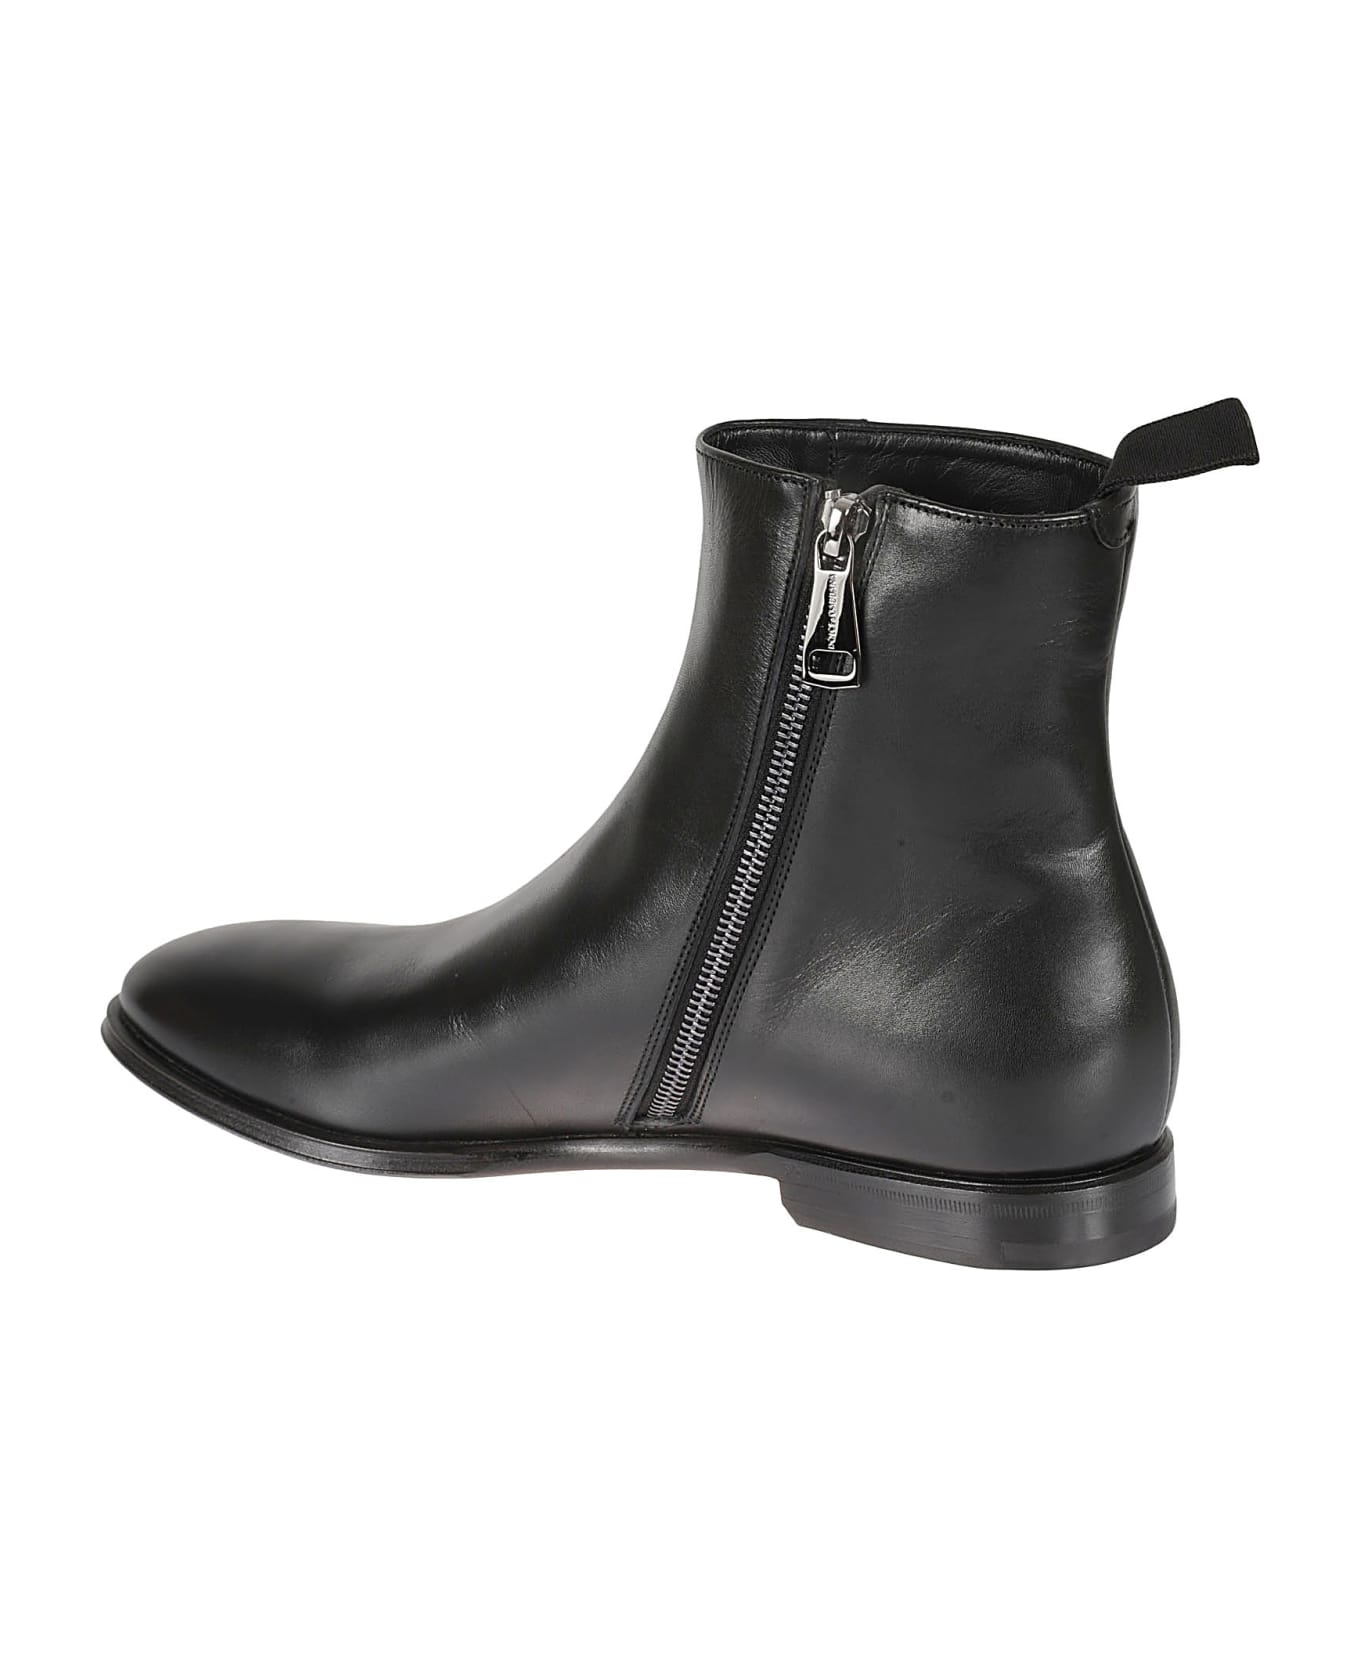 Dolce & Gabbana Horse Pull-up Boots - Black